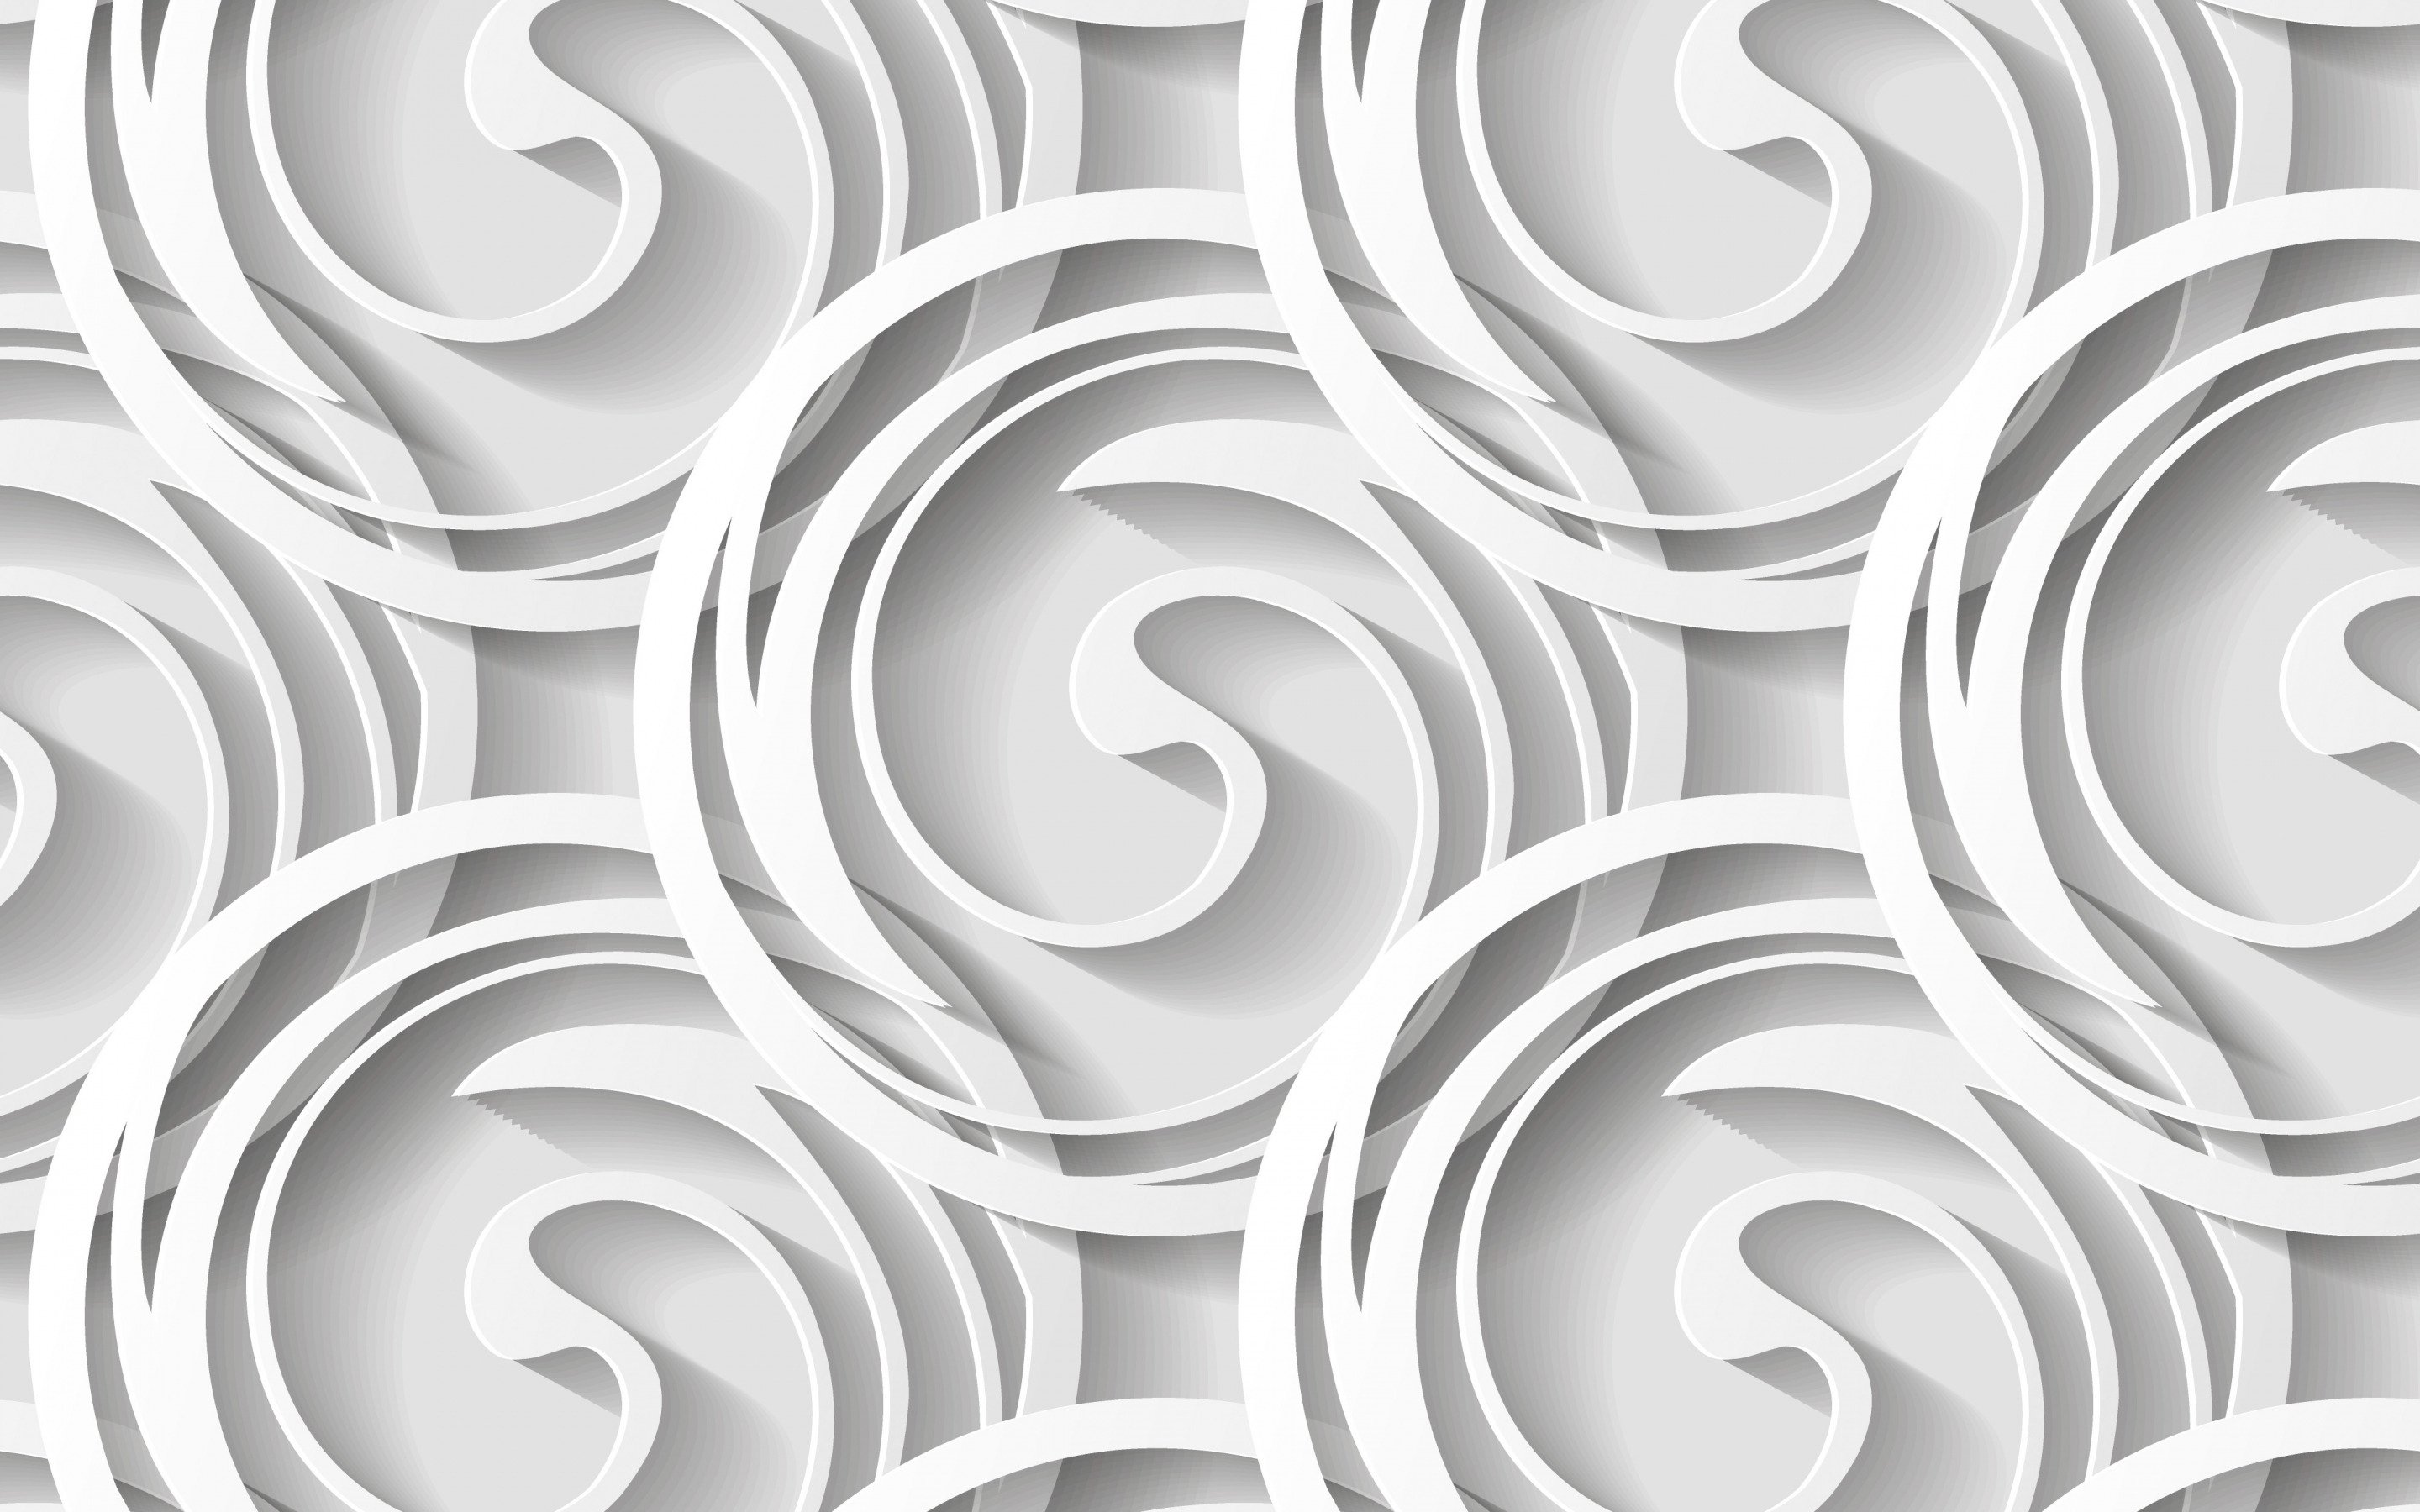 Download wallpaper white 3D texture with circles, white circles background, creative background, 3D textures, ornaments background for desktop with resolution 2880x1800. High Quality HD picture wallpaper